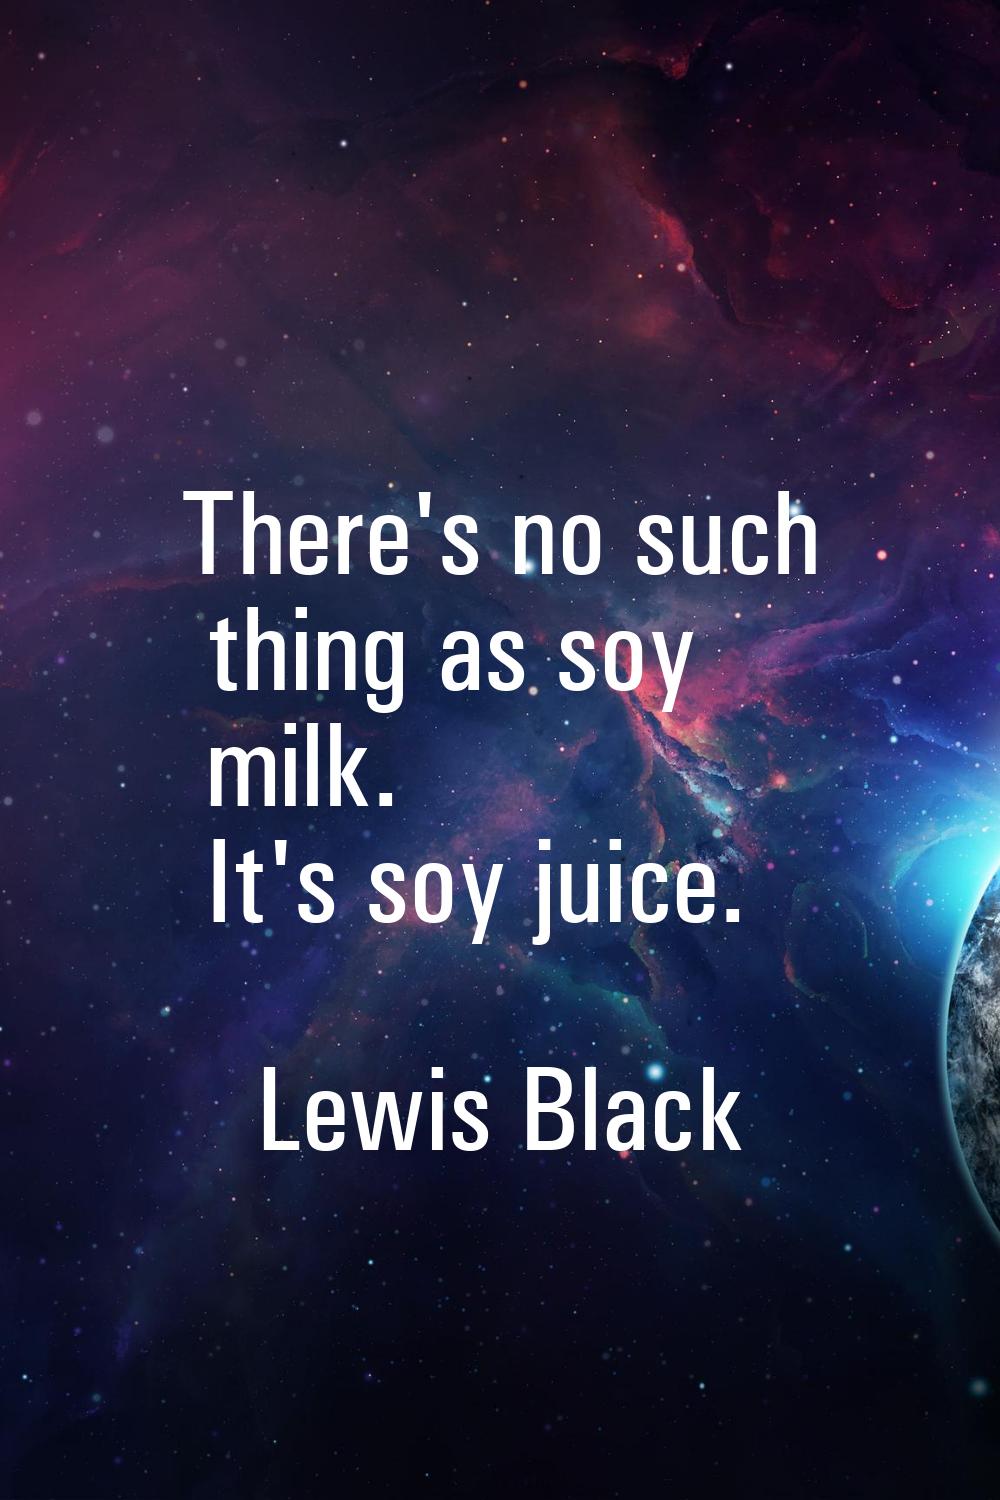 There's no such thing as soy milk. It's soy juice.